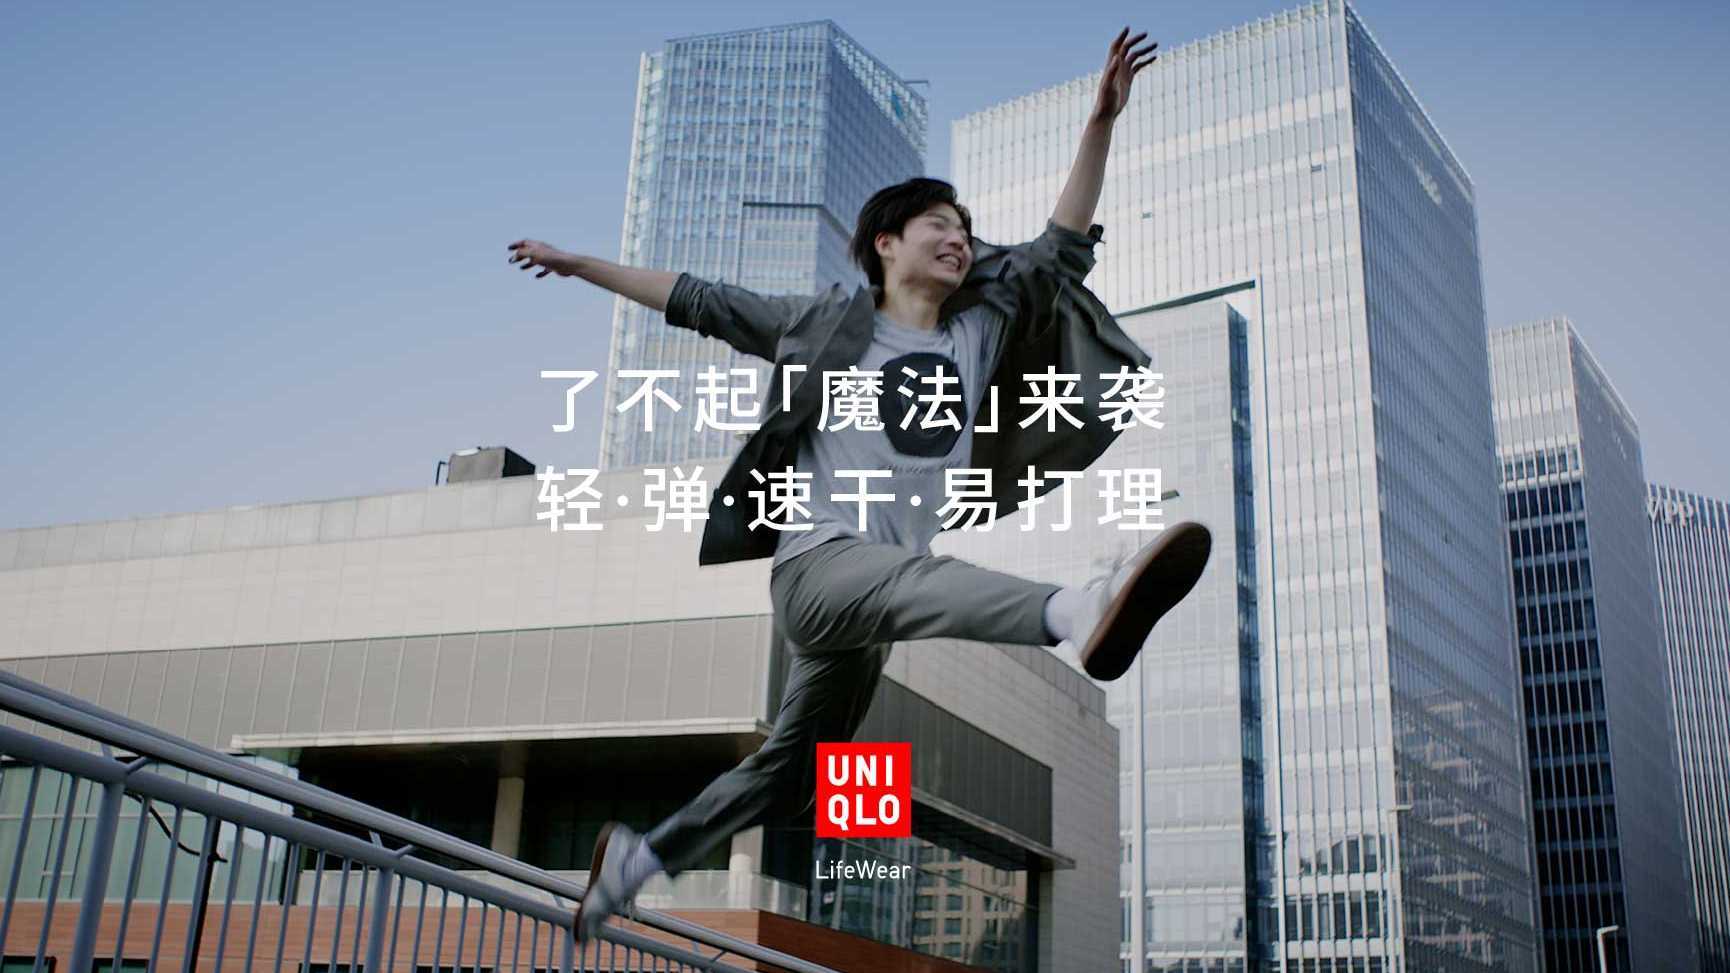 UNIQLO 优衣库｜Miracle Air Social Video